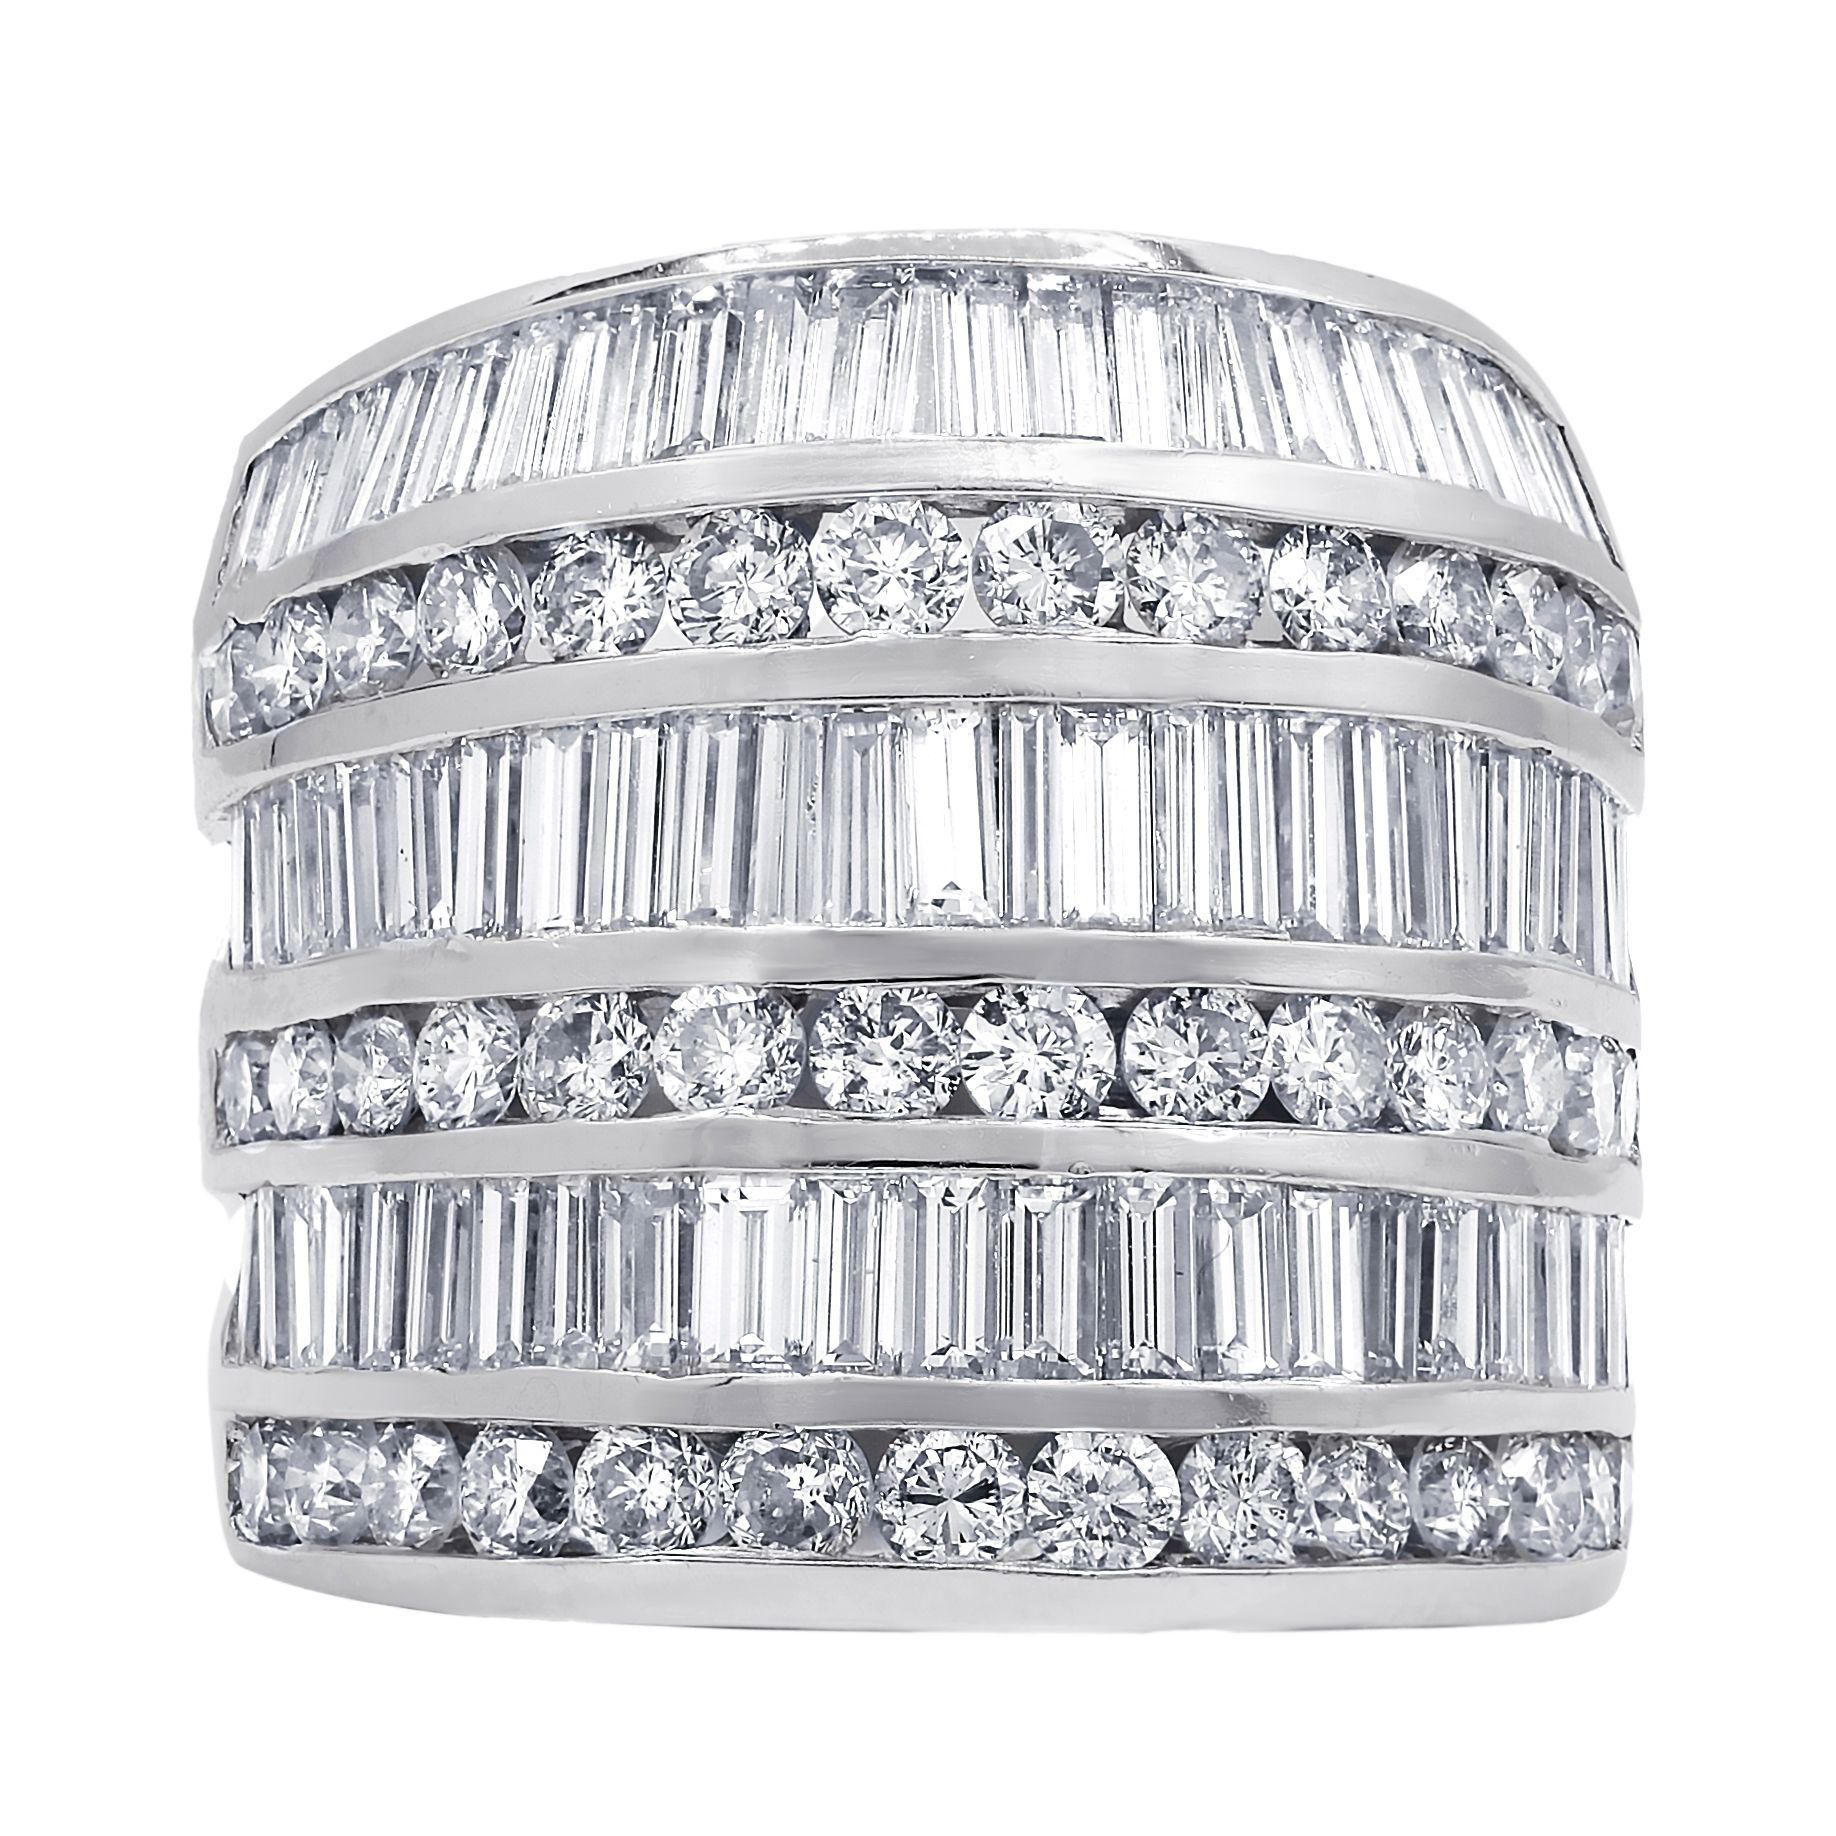 Modern Diana M. 18 kt White Gold Diamond Fashion Ring Adorned With Alternating Rows  For Sale